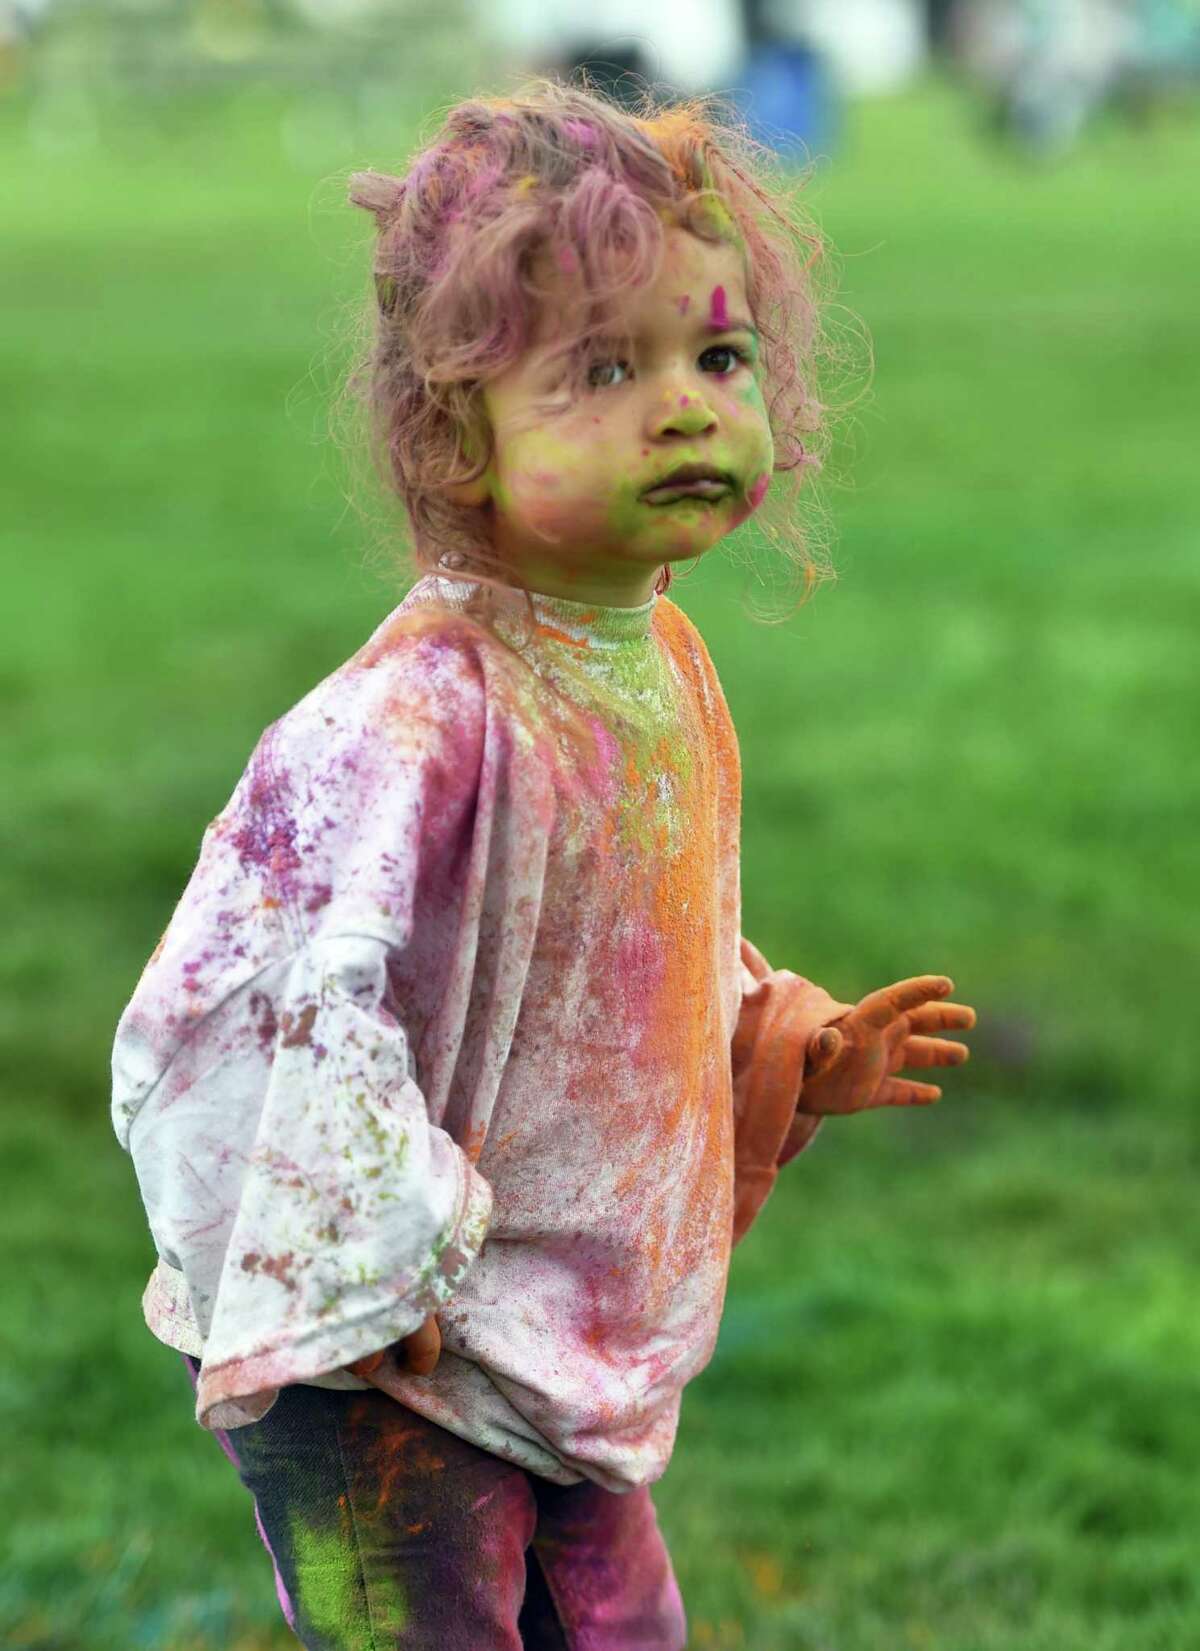 Nyla Ahlwalia, 22 months old, enjoys being covered in colored chalk dust the India Cultural Center of Greenwich's Holifest and Color Throw at Roger Sherman Baldwin Park in Greenwich, Conn., on Saturday May 14, 2022. Although the Color Throw is highlight of event, there were plenty of other activities like Indian food, arts and crafts, DJ Kunjun providing music, henna tattoos and an ice cream truck.